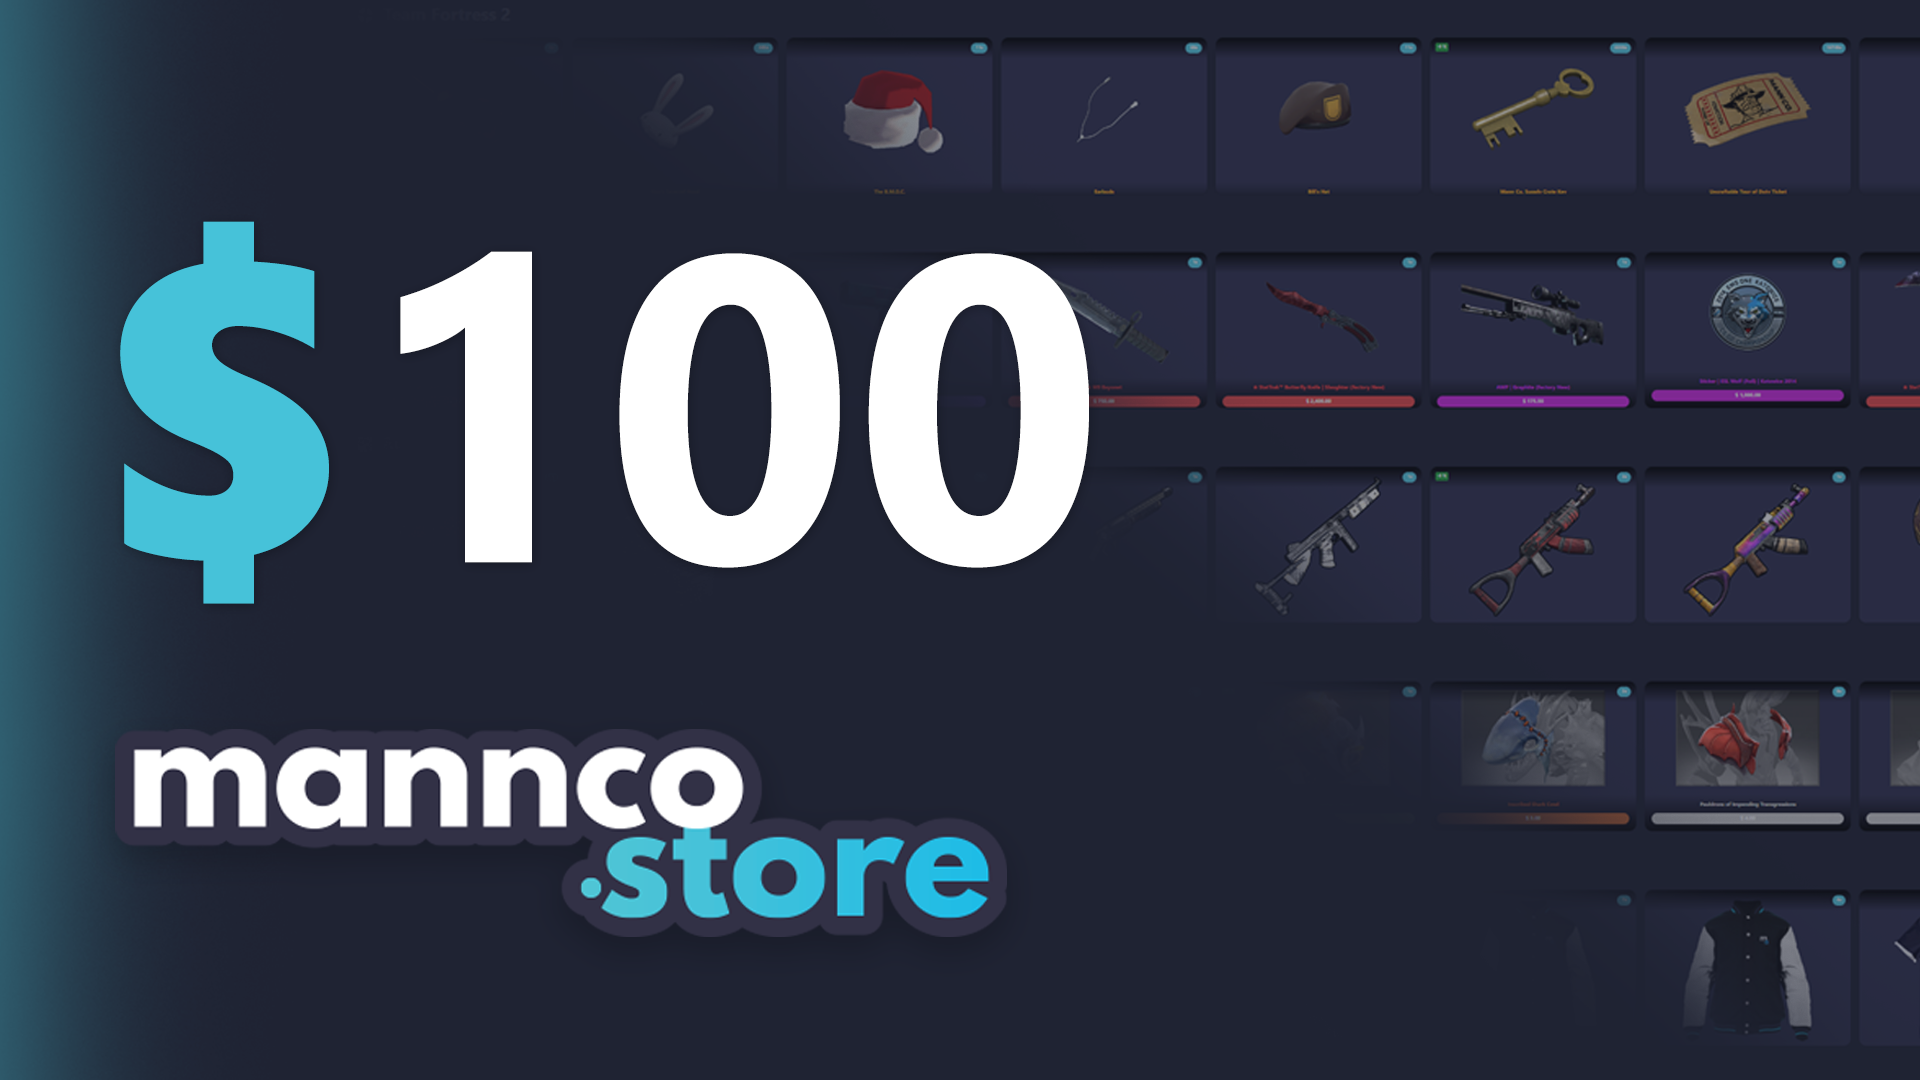 Mannco.store $100 Gift Card